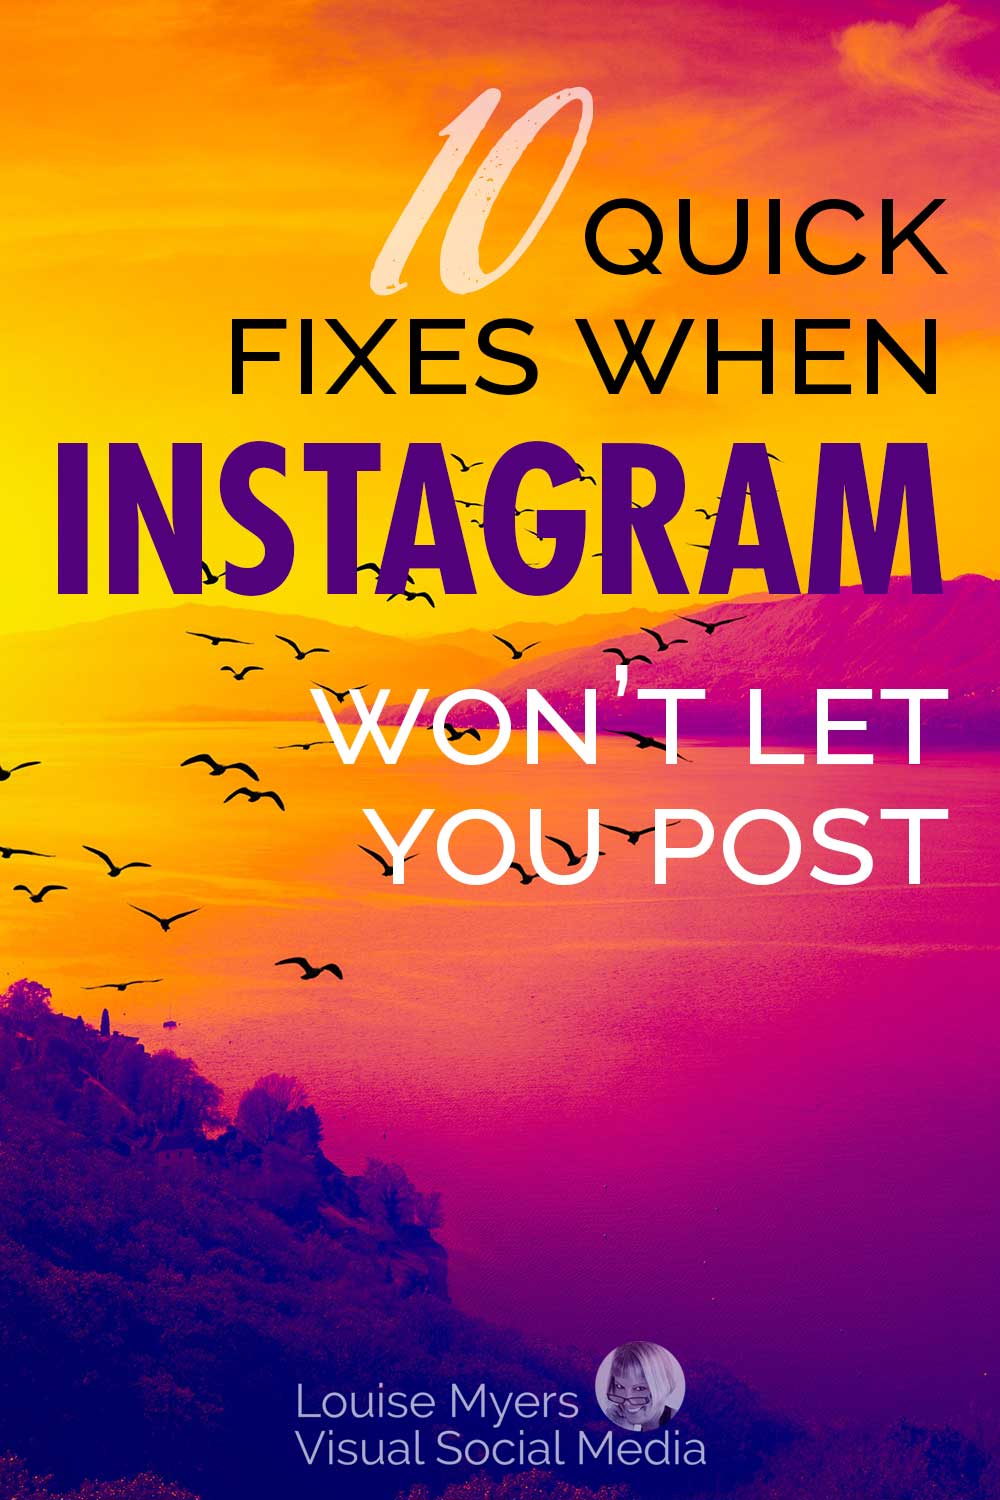 instagram-colored sunset over ocean has text overlay saying 10 quick fixes when you can't post on IG.